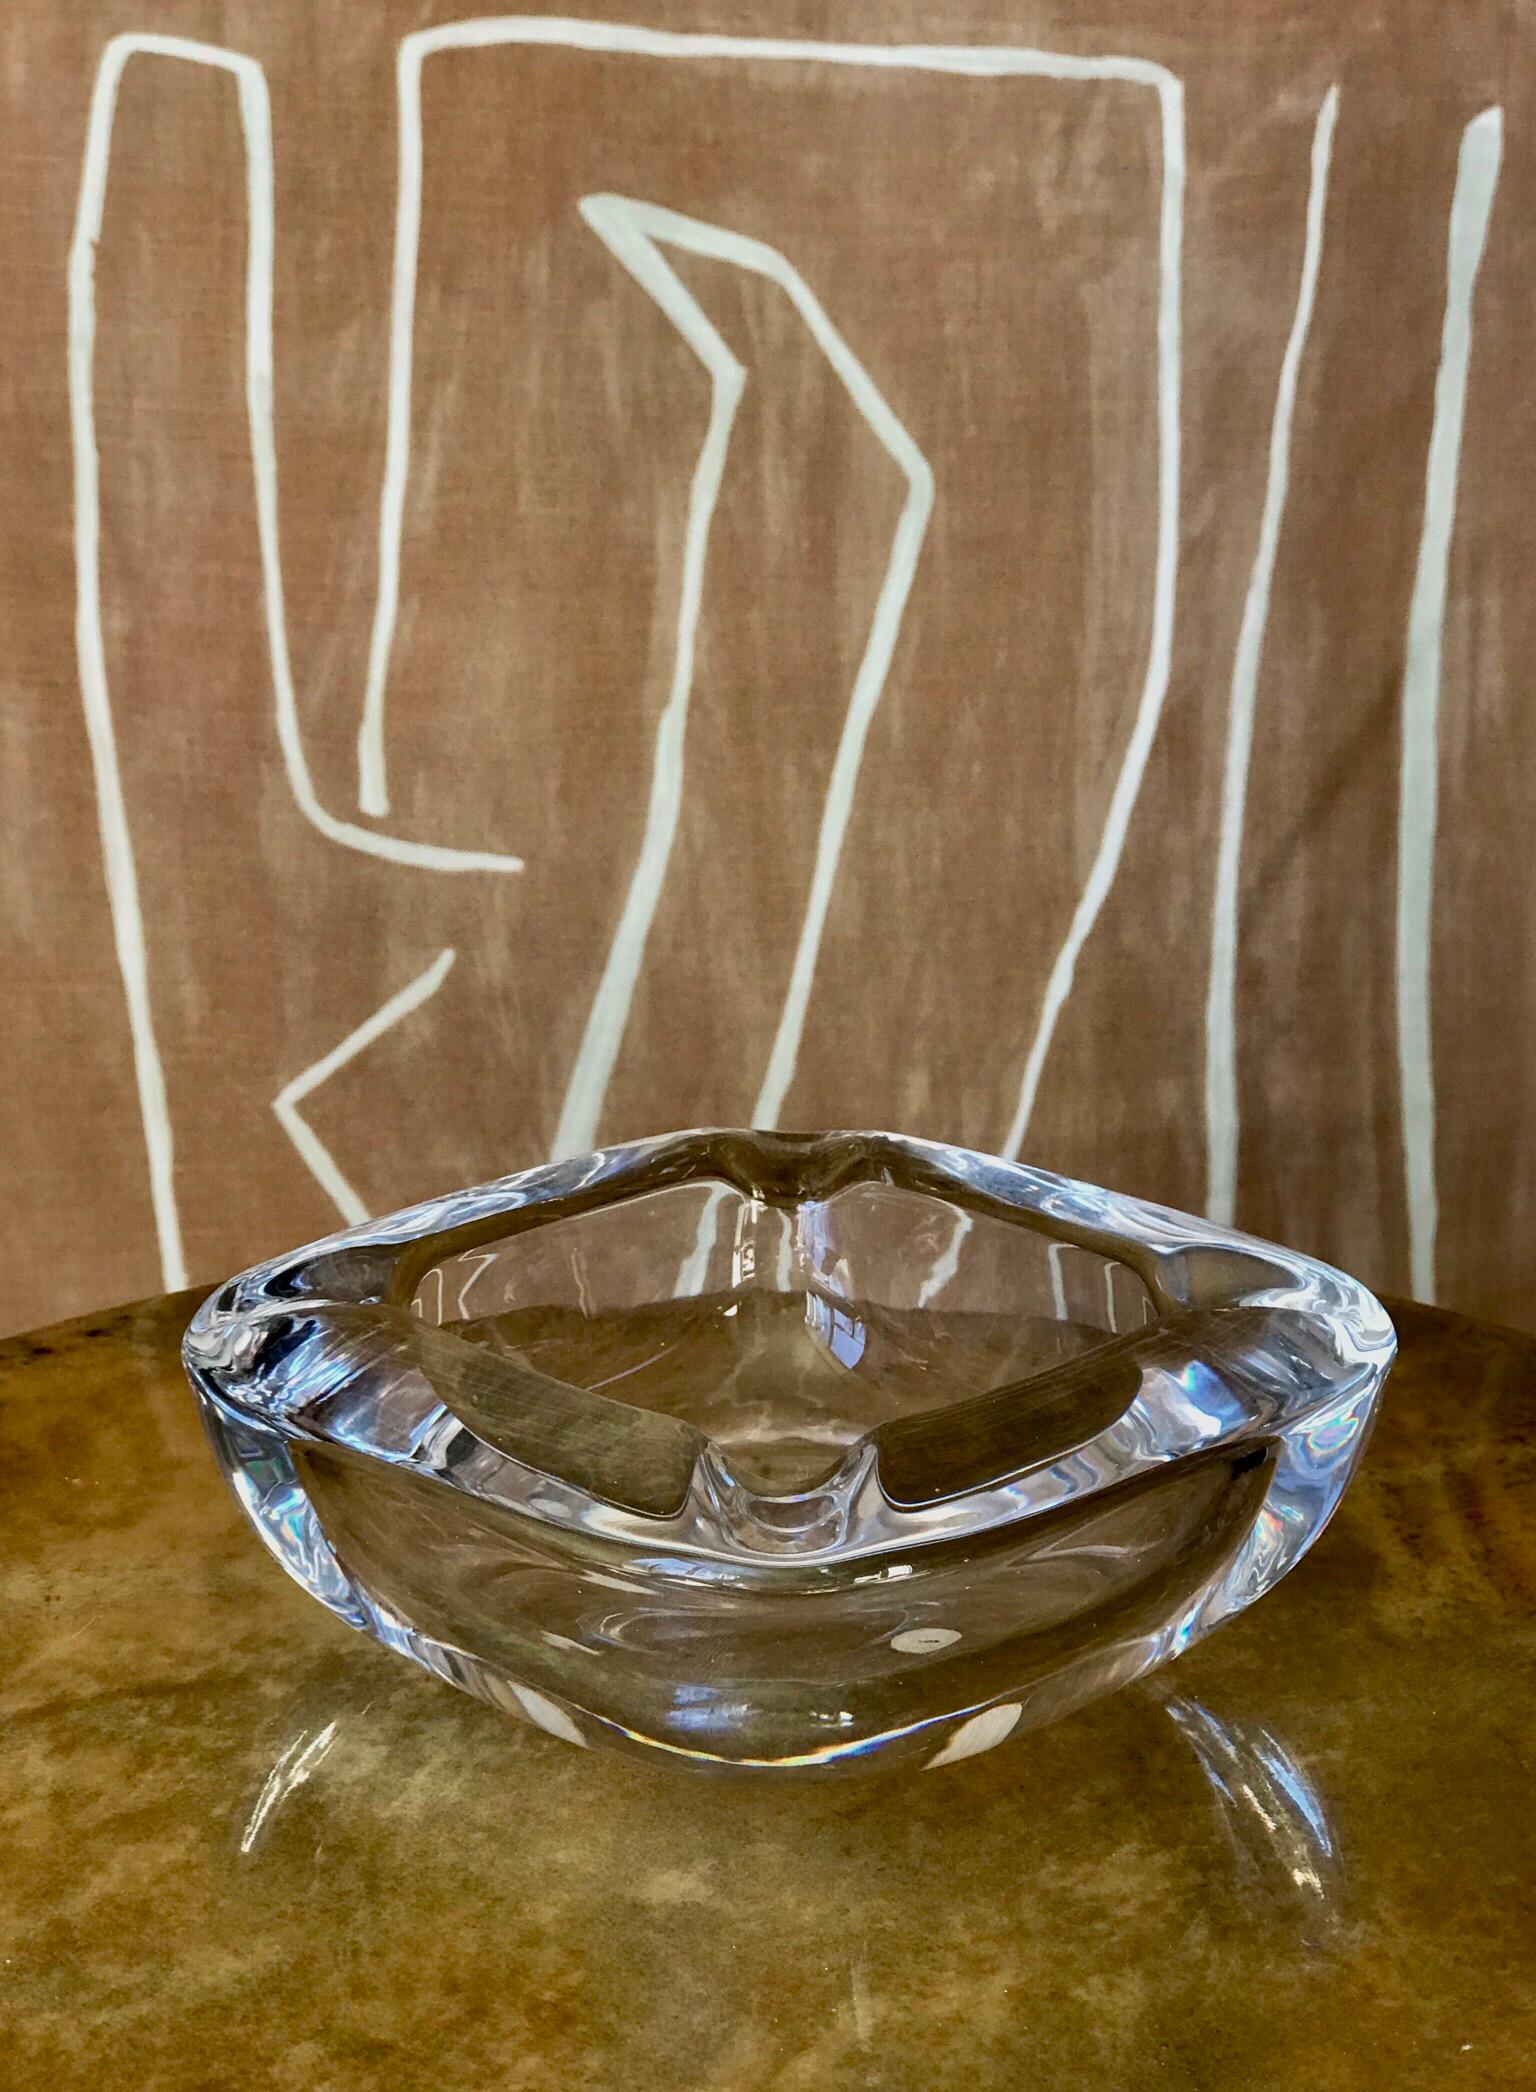 A superior and striking leaded crystal ashtray / bowl by the esteemed Art Vannes France foundry. Vannes was Duam, and Duam was Vannes. They were the same company. Awesome and of the highest quality.